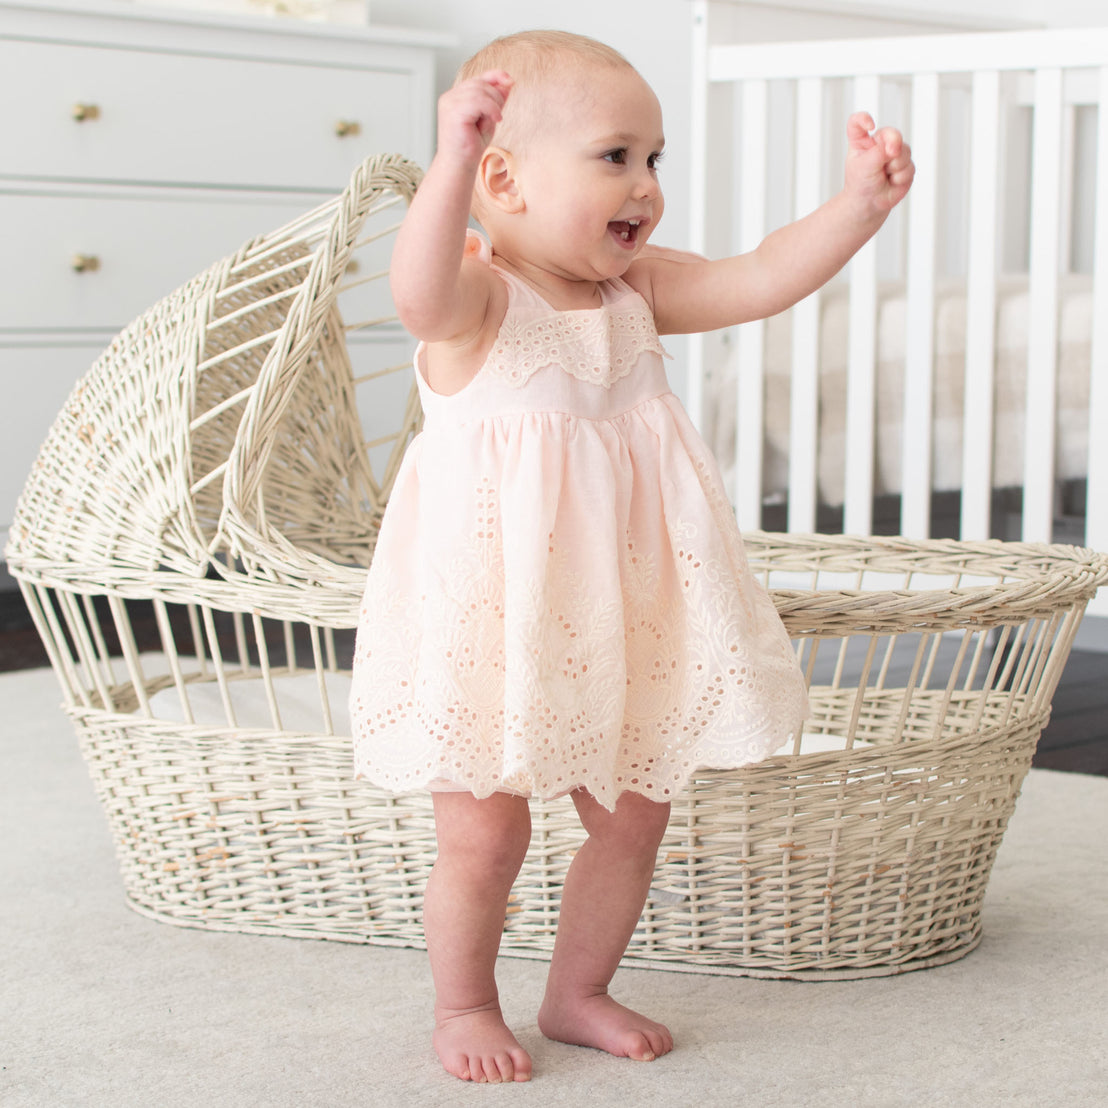 Baby wearing the pink Ingrid Romper Dress that is handcrafted with a lightweight 100% cotton 